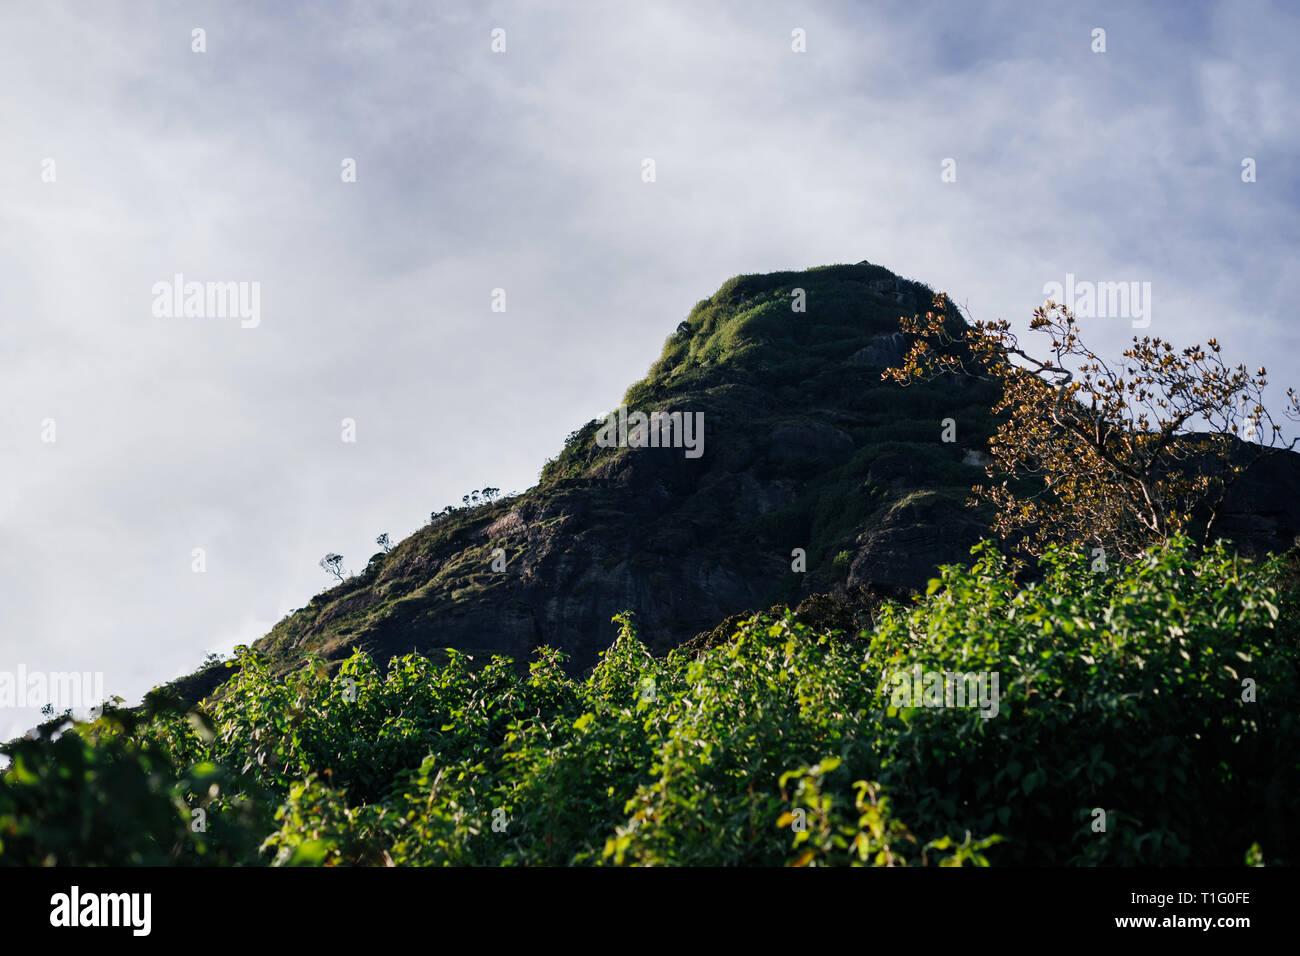 Rock with trees and grass in Sri Lanka Stock Photo